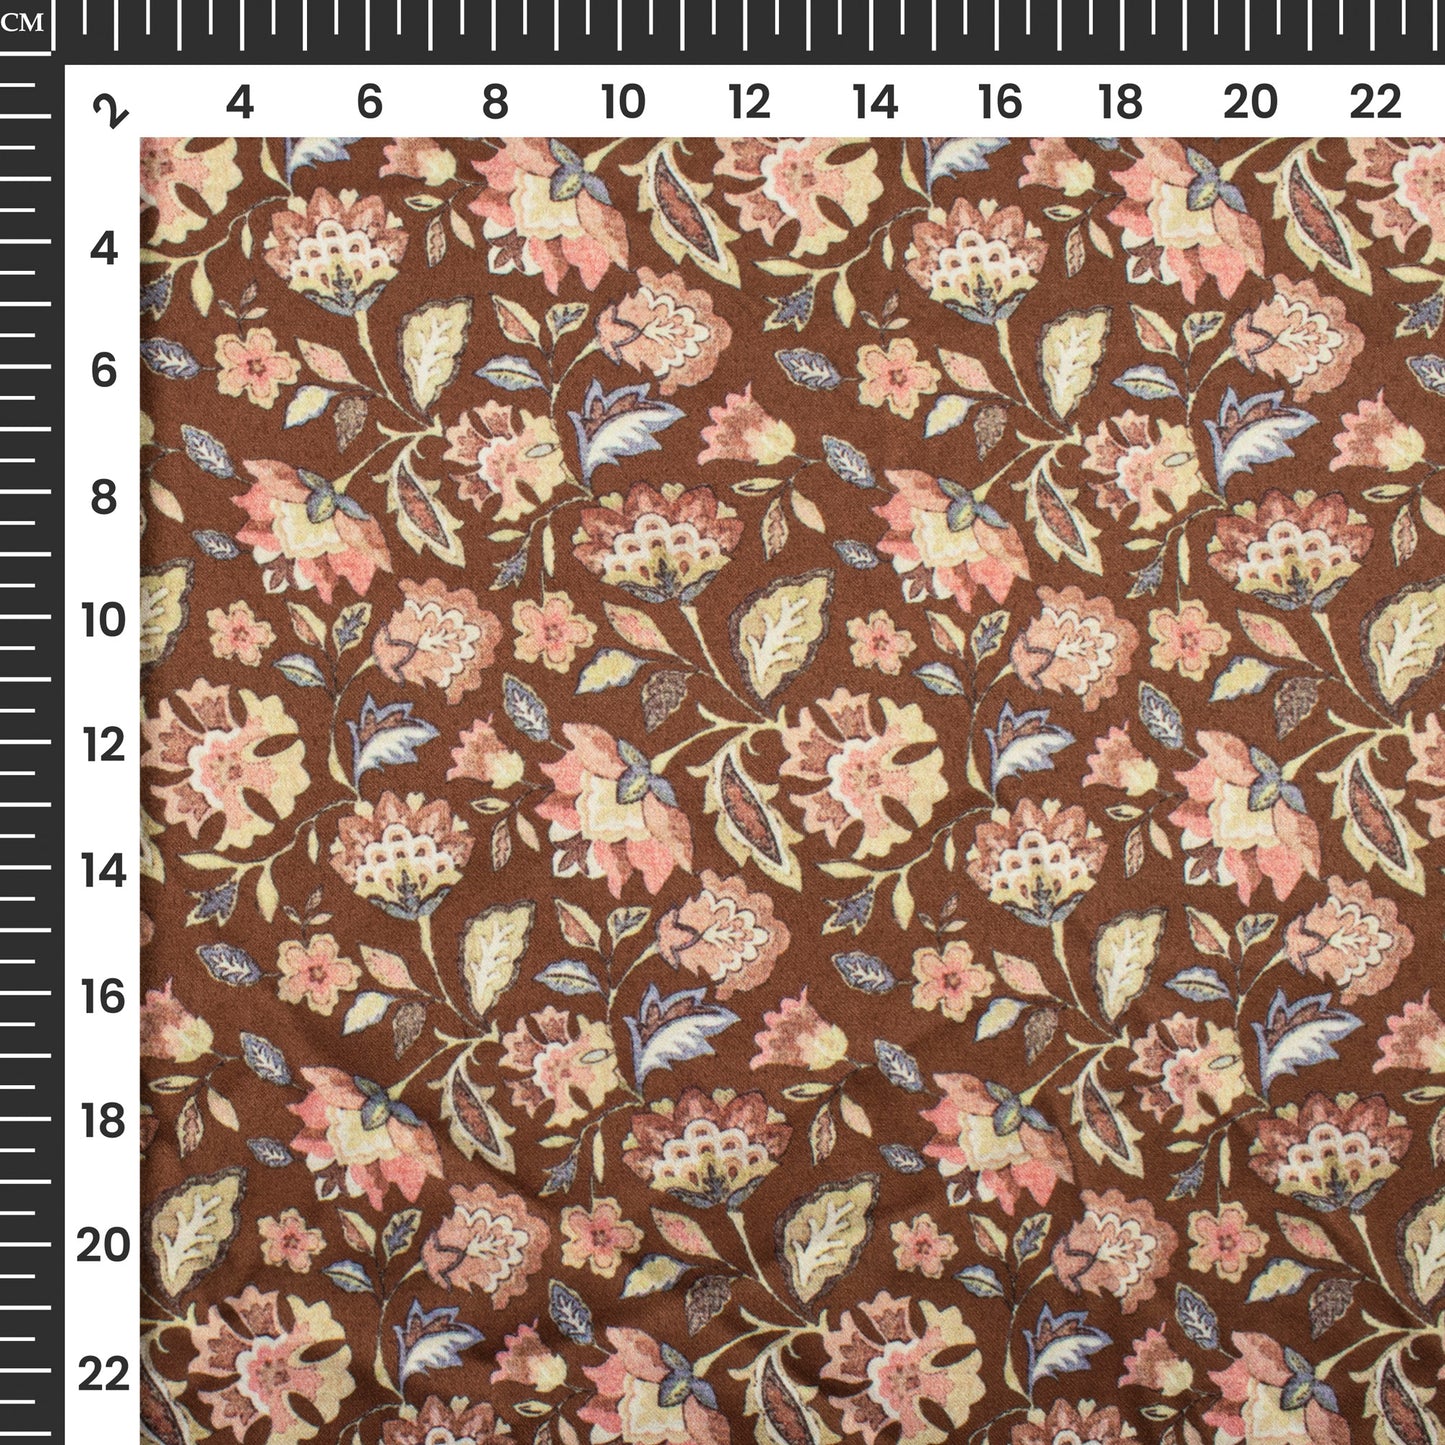 Pleasing Floral Digital Print Charmeuse Satin Fabric (Width 58 Inches)